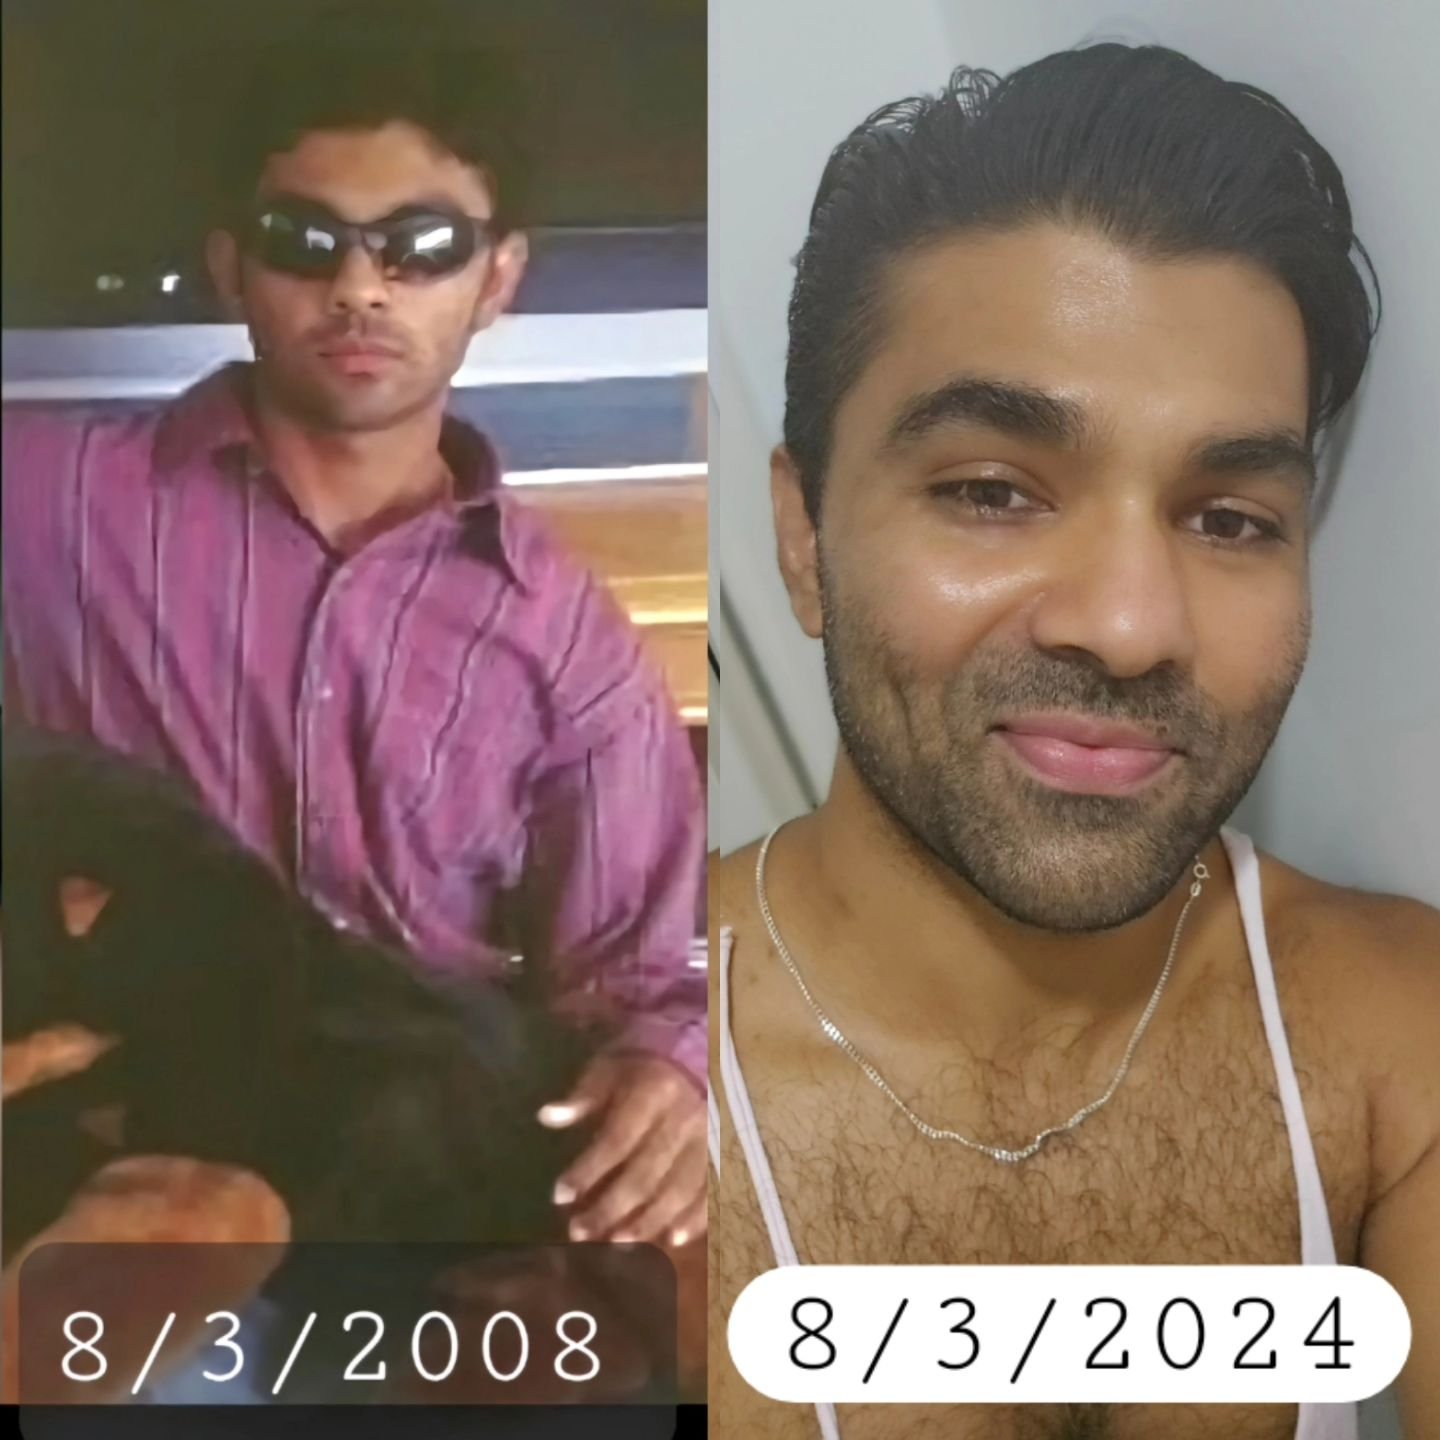 16 years journey in New Zealand 🇳🇿 today 🙂 

8/3/2008 ➡️ 8/3/2024

Swipe ➡️ to see pictures on the day I arrived vs today.

Namaskar Fam 🙏🏽

I landed in New Zealand today 16 years ago and its been a very fulfilling journey.

The best parts have 